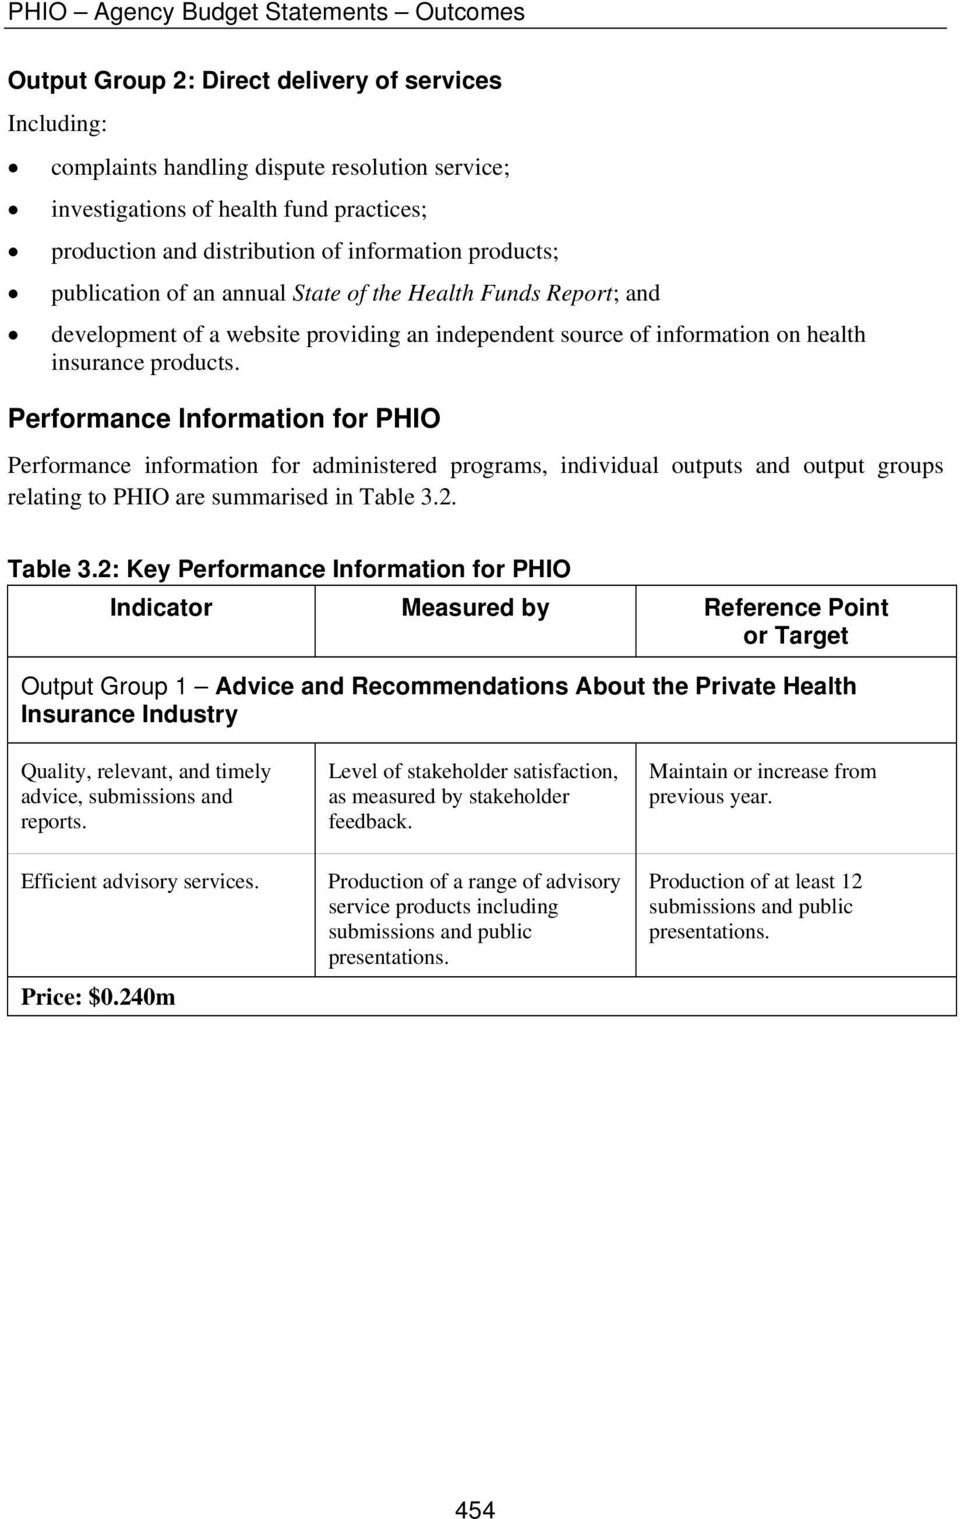 products. Performance Information for PHIO Performance information for administered programs, individual outputs and output groups relating to PHIO are summarised in Table 3.